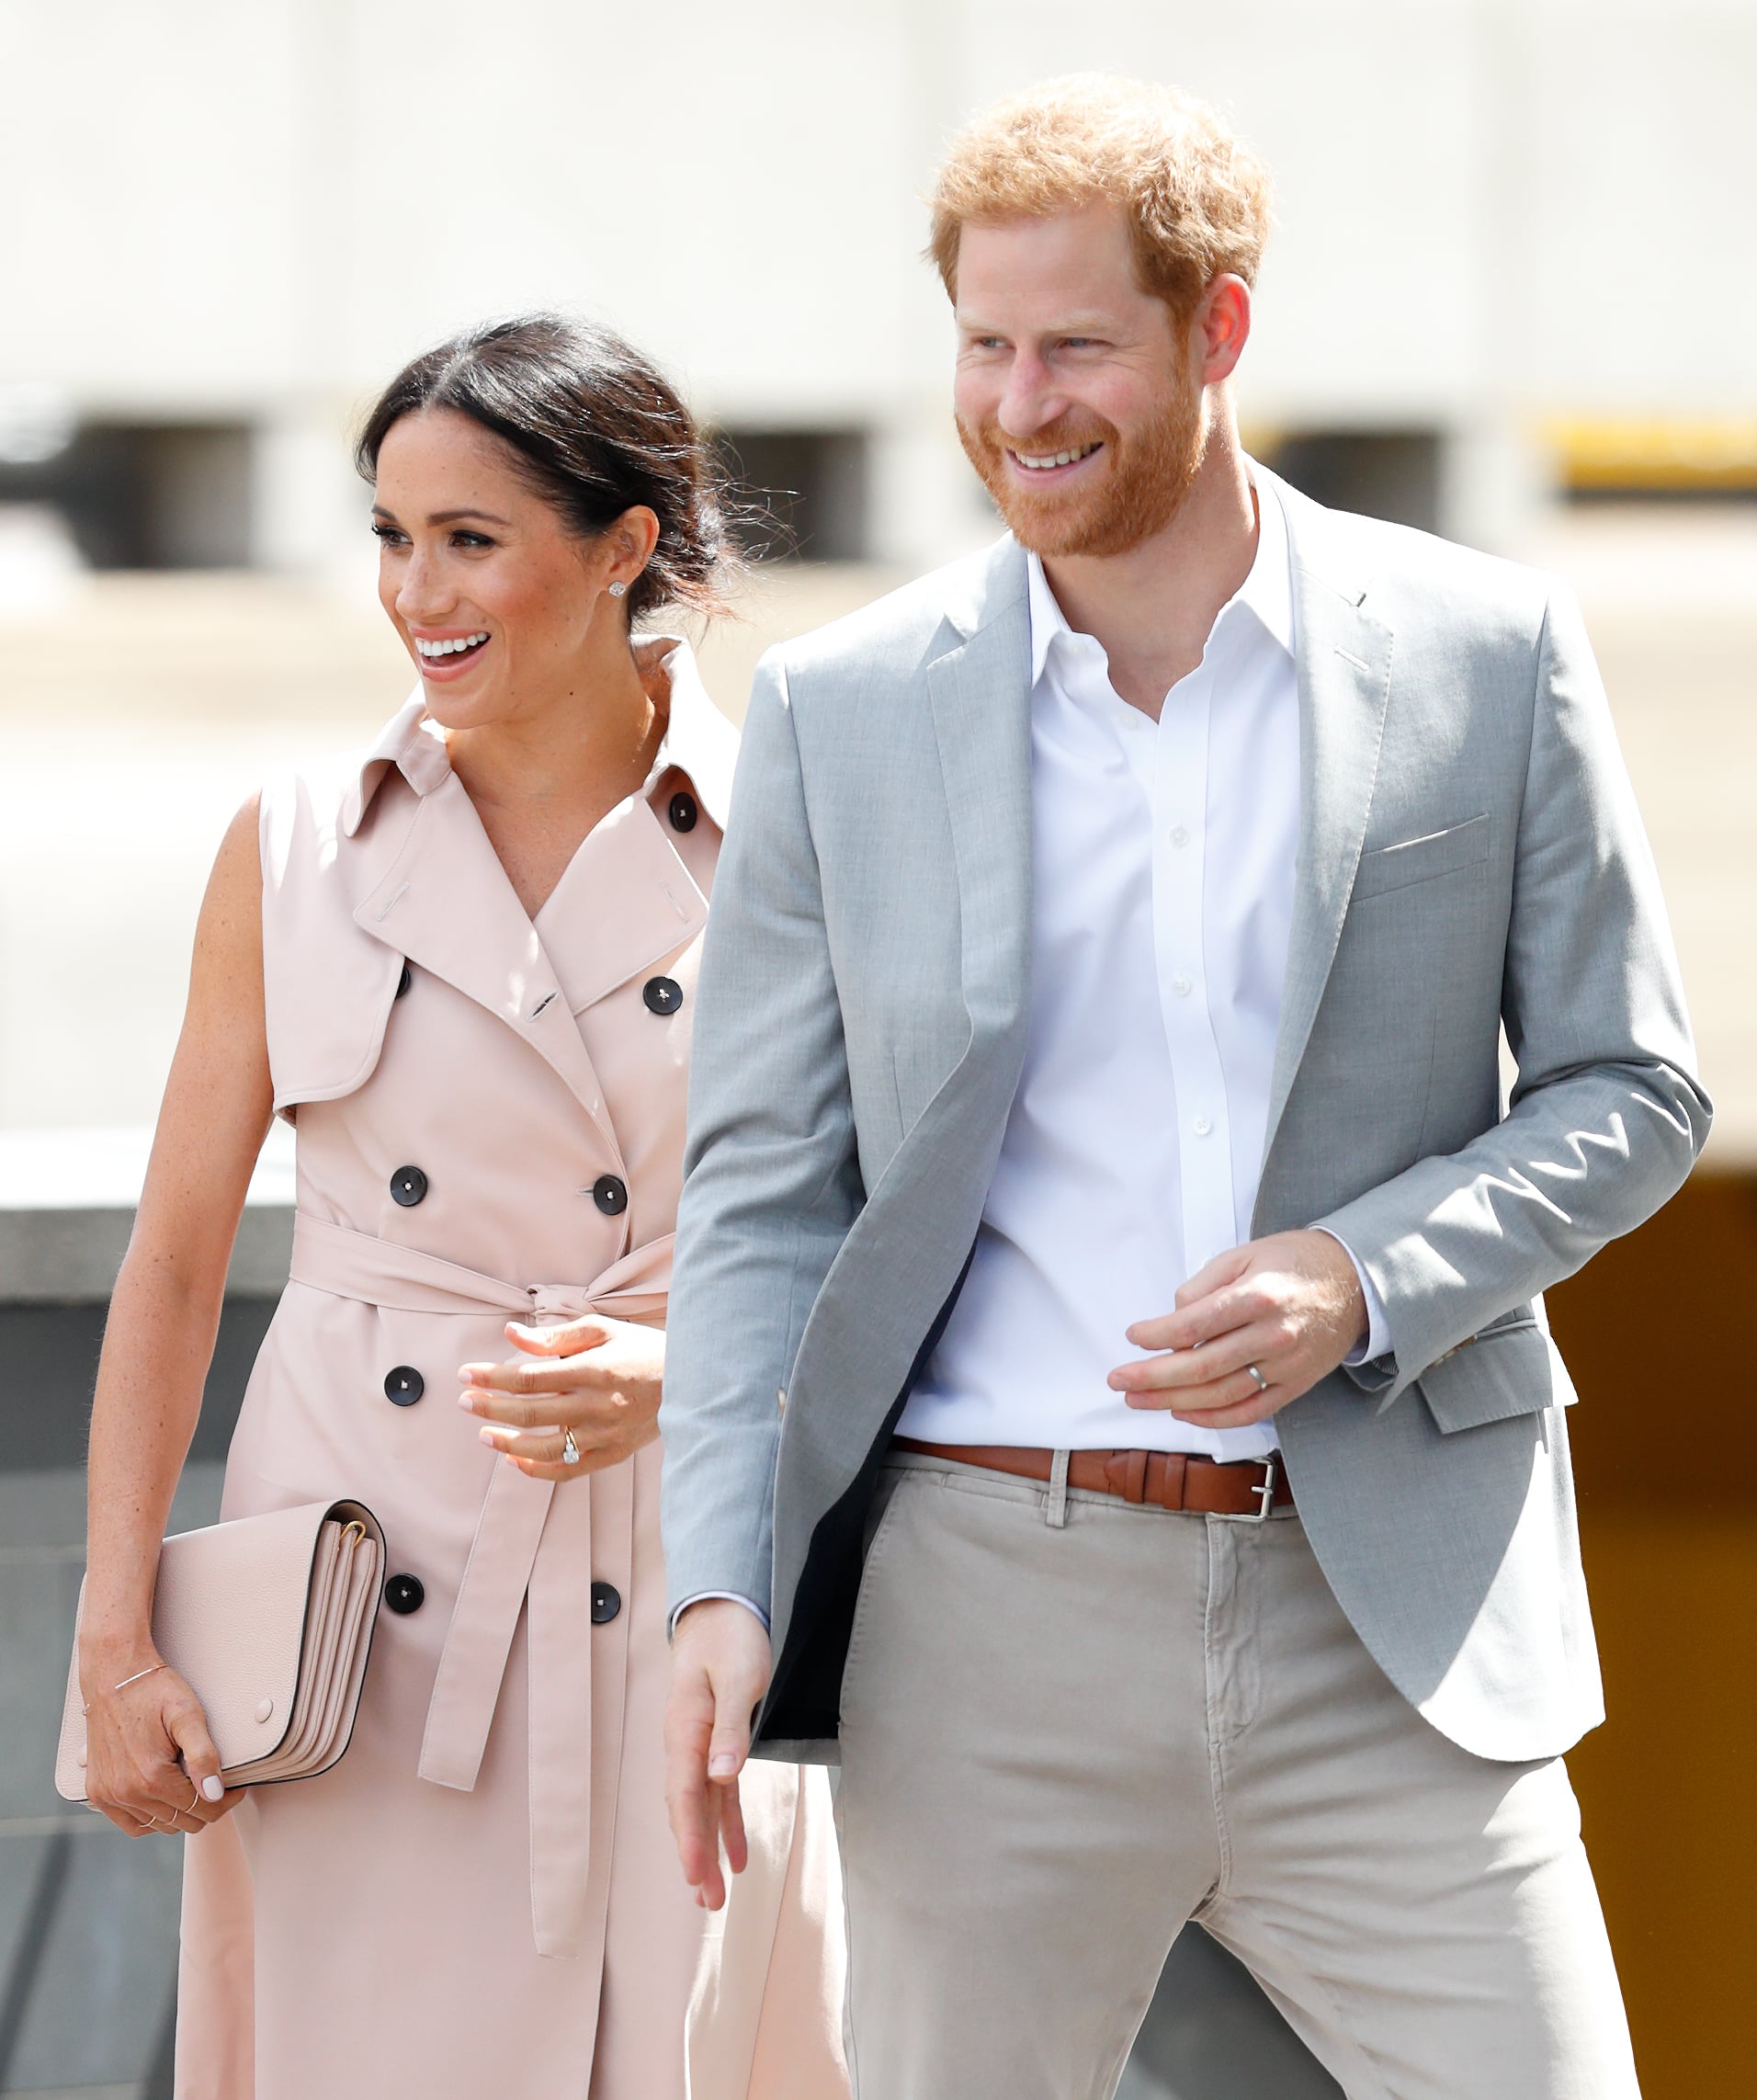 LONDON, UNITED KINGDOM - JULY 17: (EMBARGOED FOR PUBLICATION IN UK NEWSPAPERS UNTIL 24 HOURS AFTER CREATE DATE AND TIME) Meghan, Duchess of Sussex and Prince Harry, Duke of Sussex visits The Nelson Mandela Centenary Exhibition at the Southbank Centre on July 17, 2018 in London, England. The exhibition explores the life and times of Nelson Mandela and marks the centenary of his birth. (Photo by Max Mumby/Indigo/Getty Images)